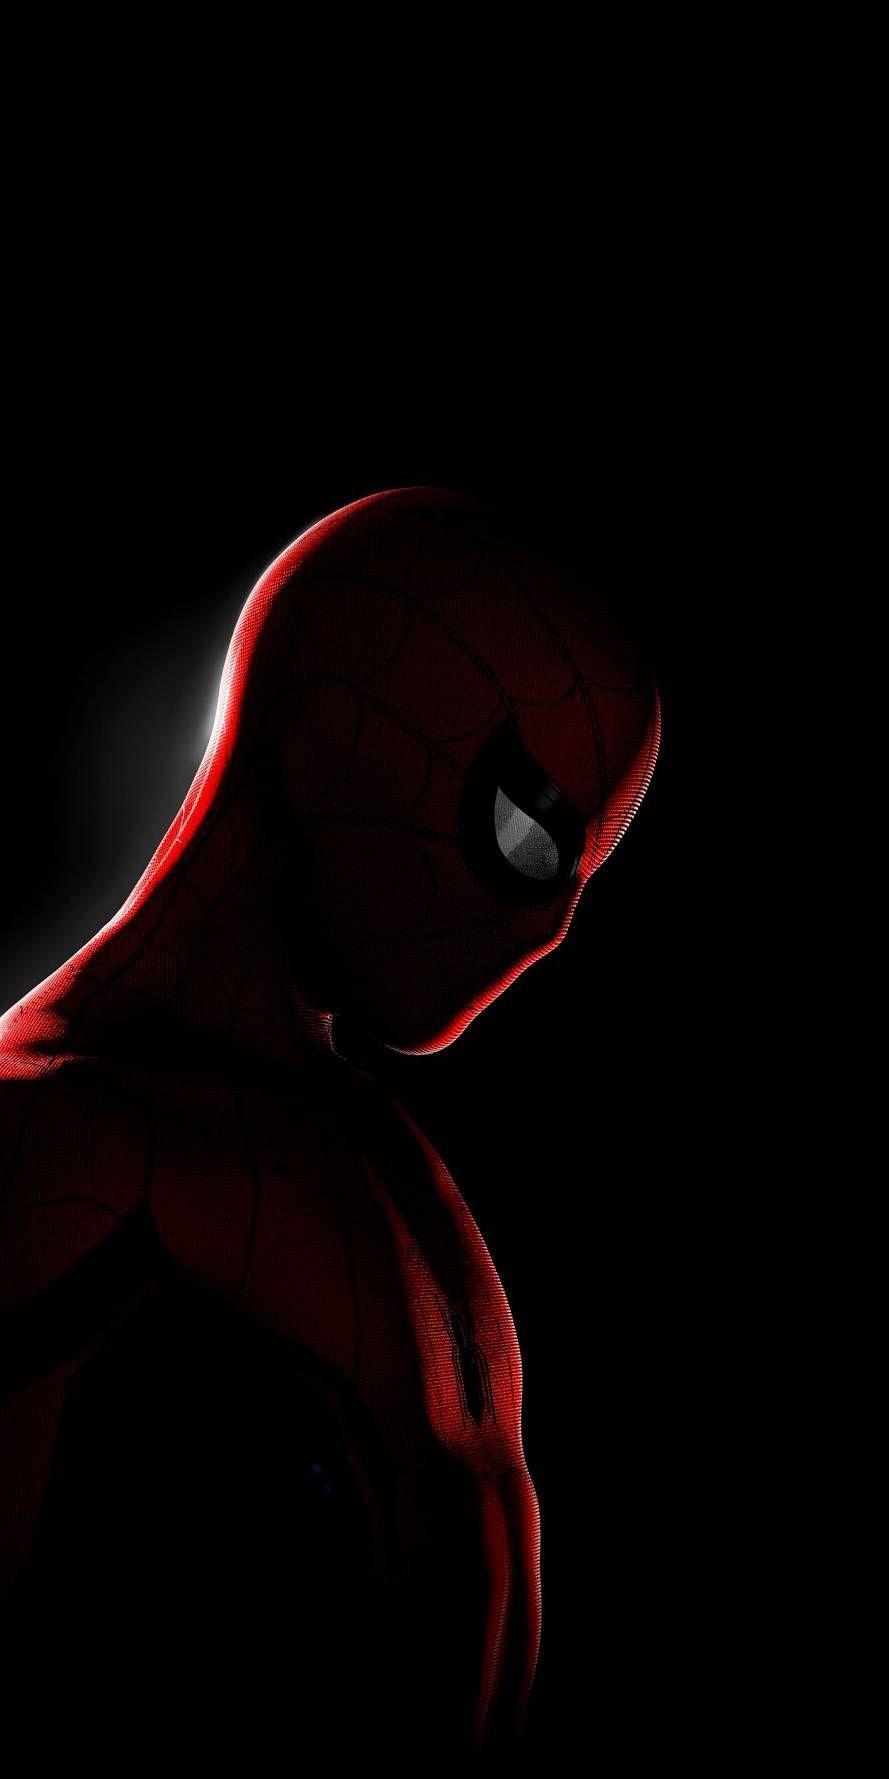 All Spider Man IPhone Wallpaper Free All Spider Man IPhone